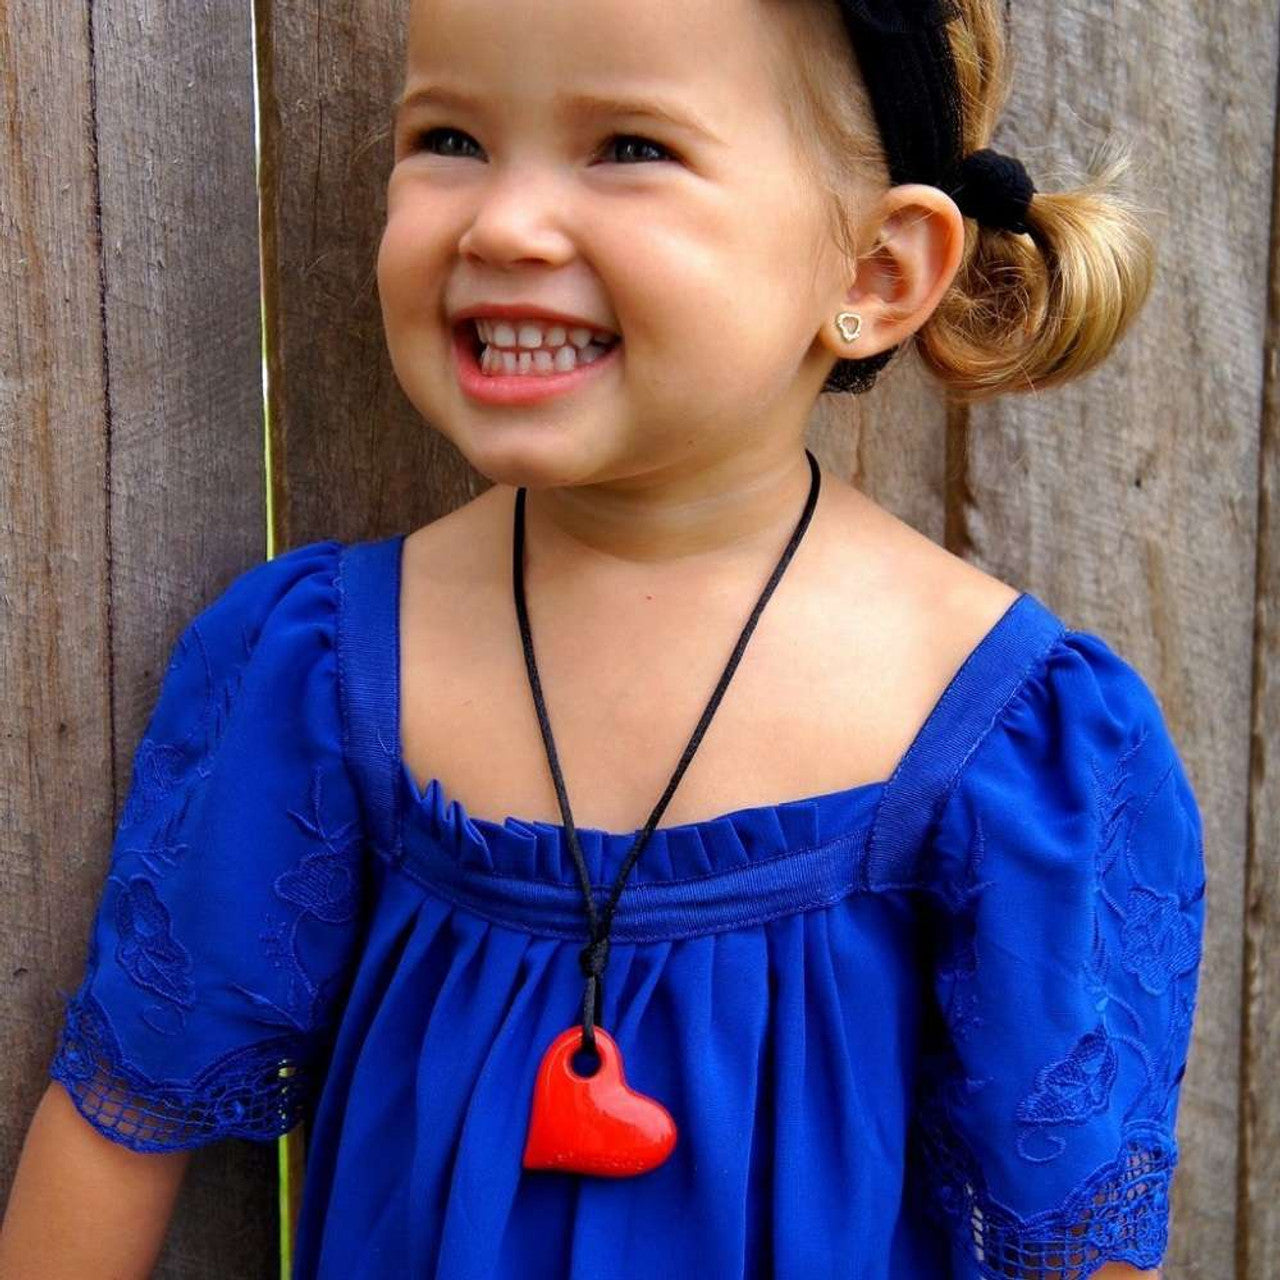 A child wtih light skin tone and blonde pigtails is smiling and wearing a red Heart Pendant.